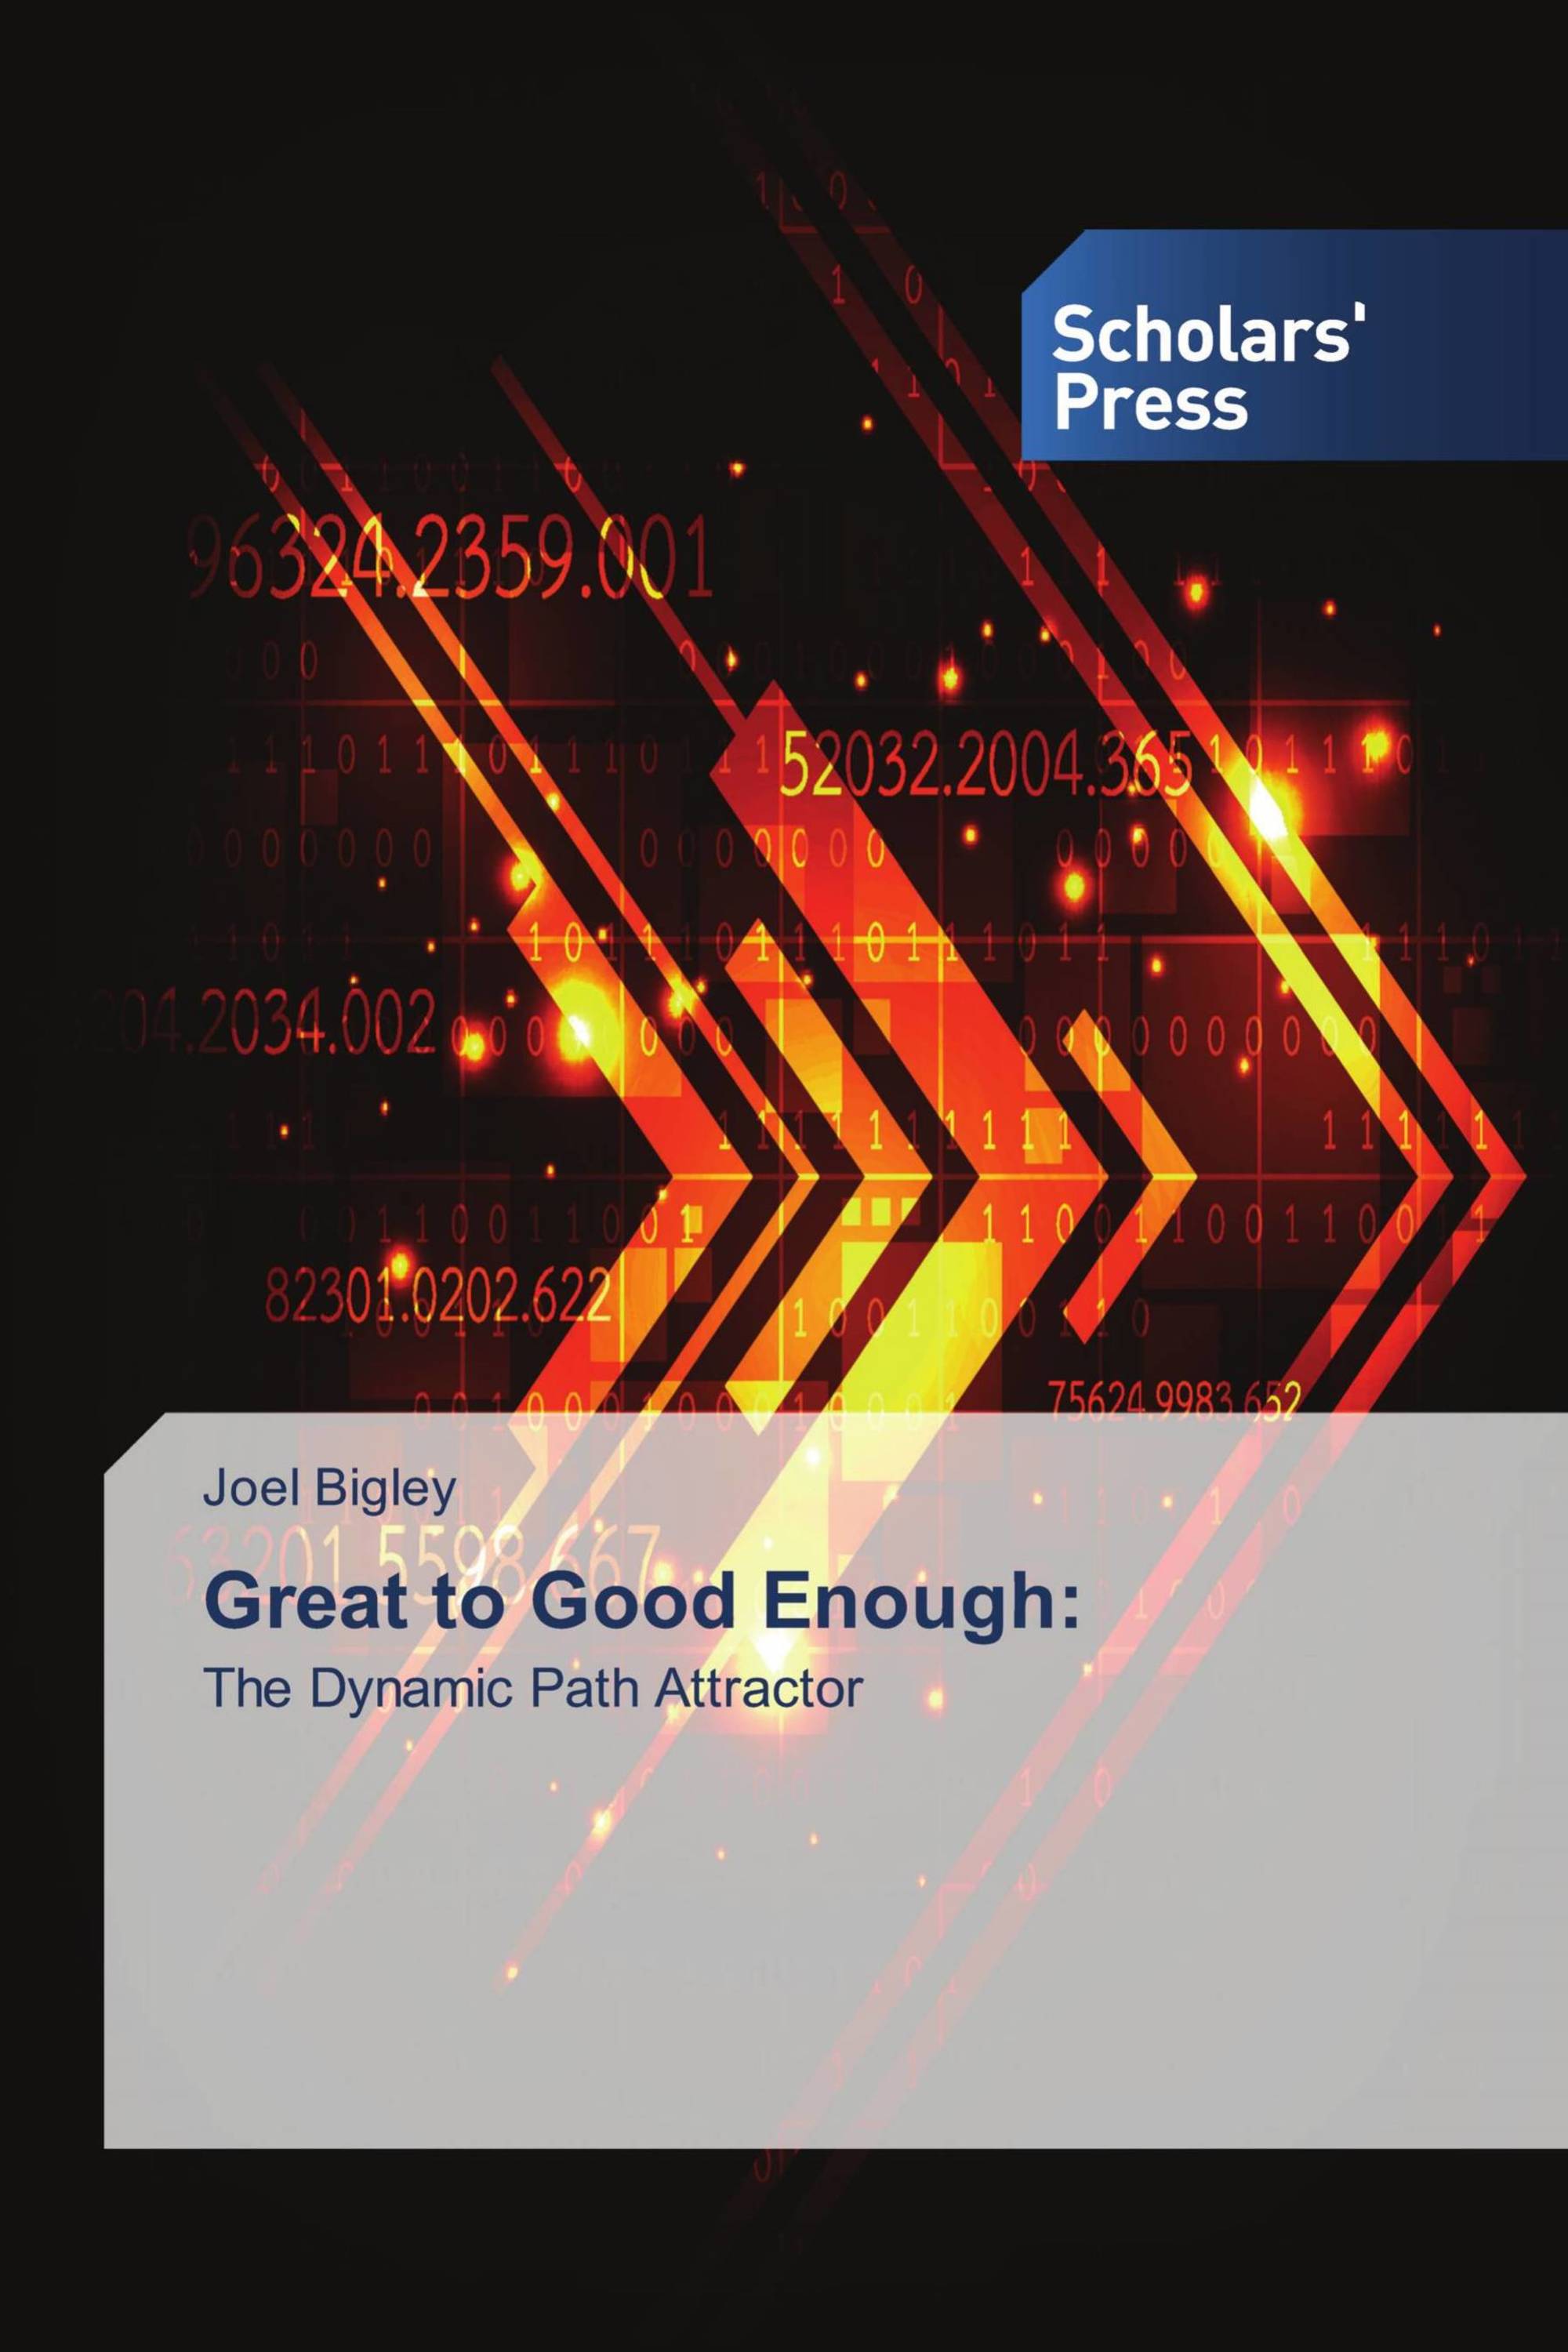 Great to Good Enough: